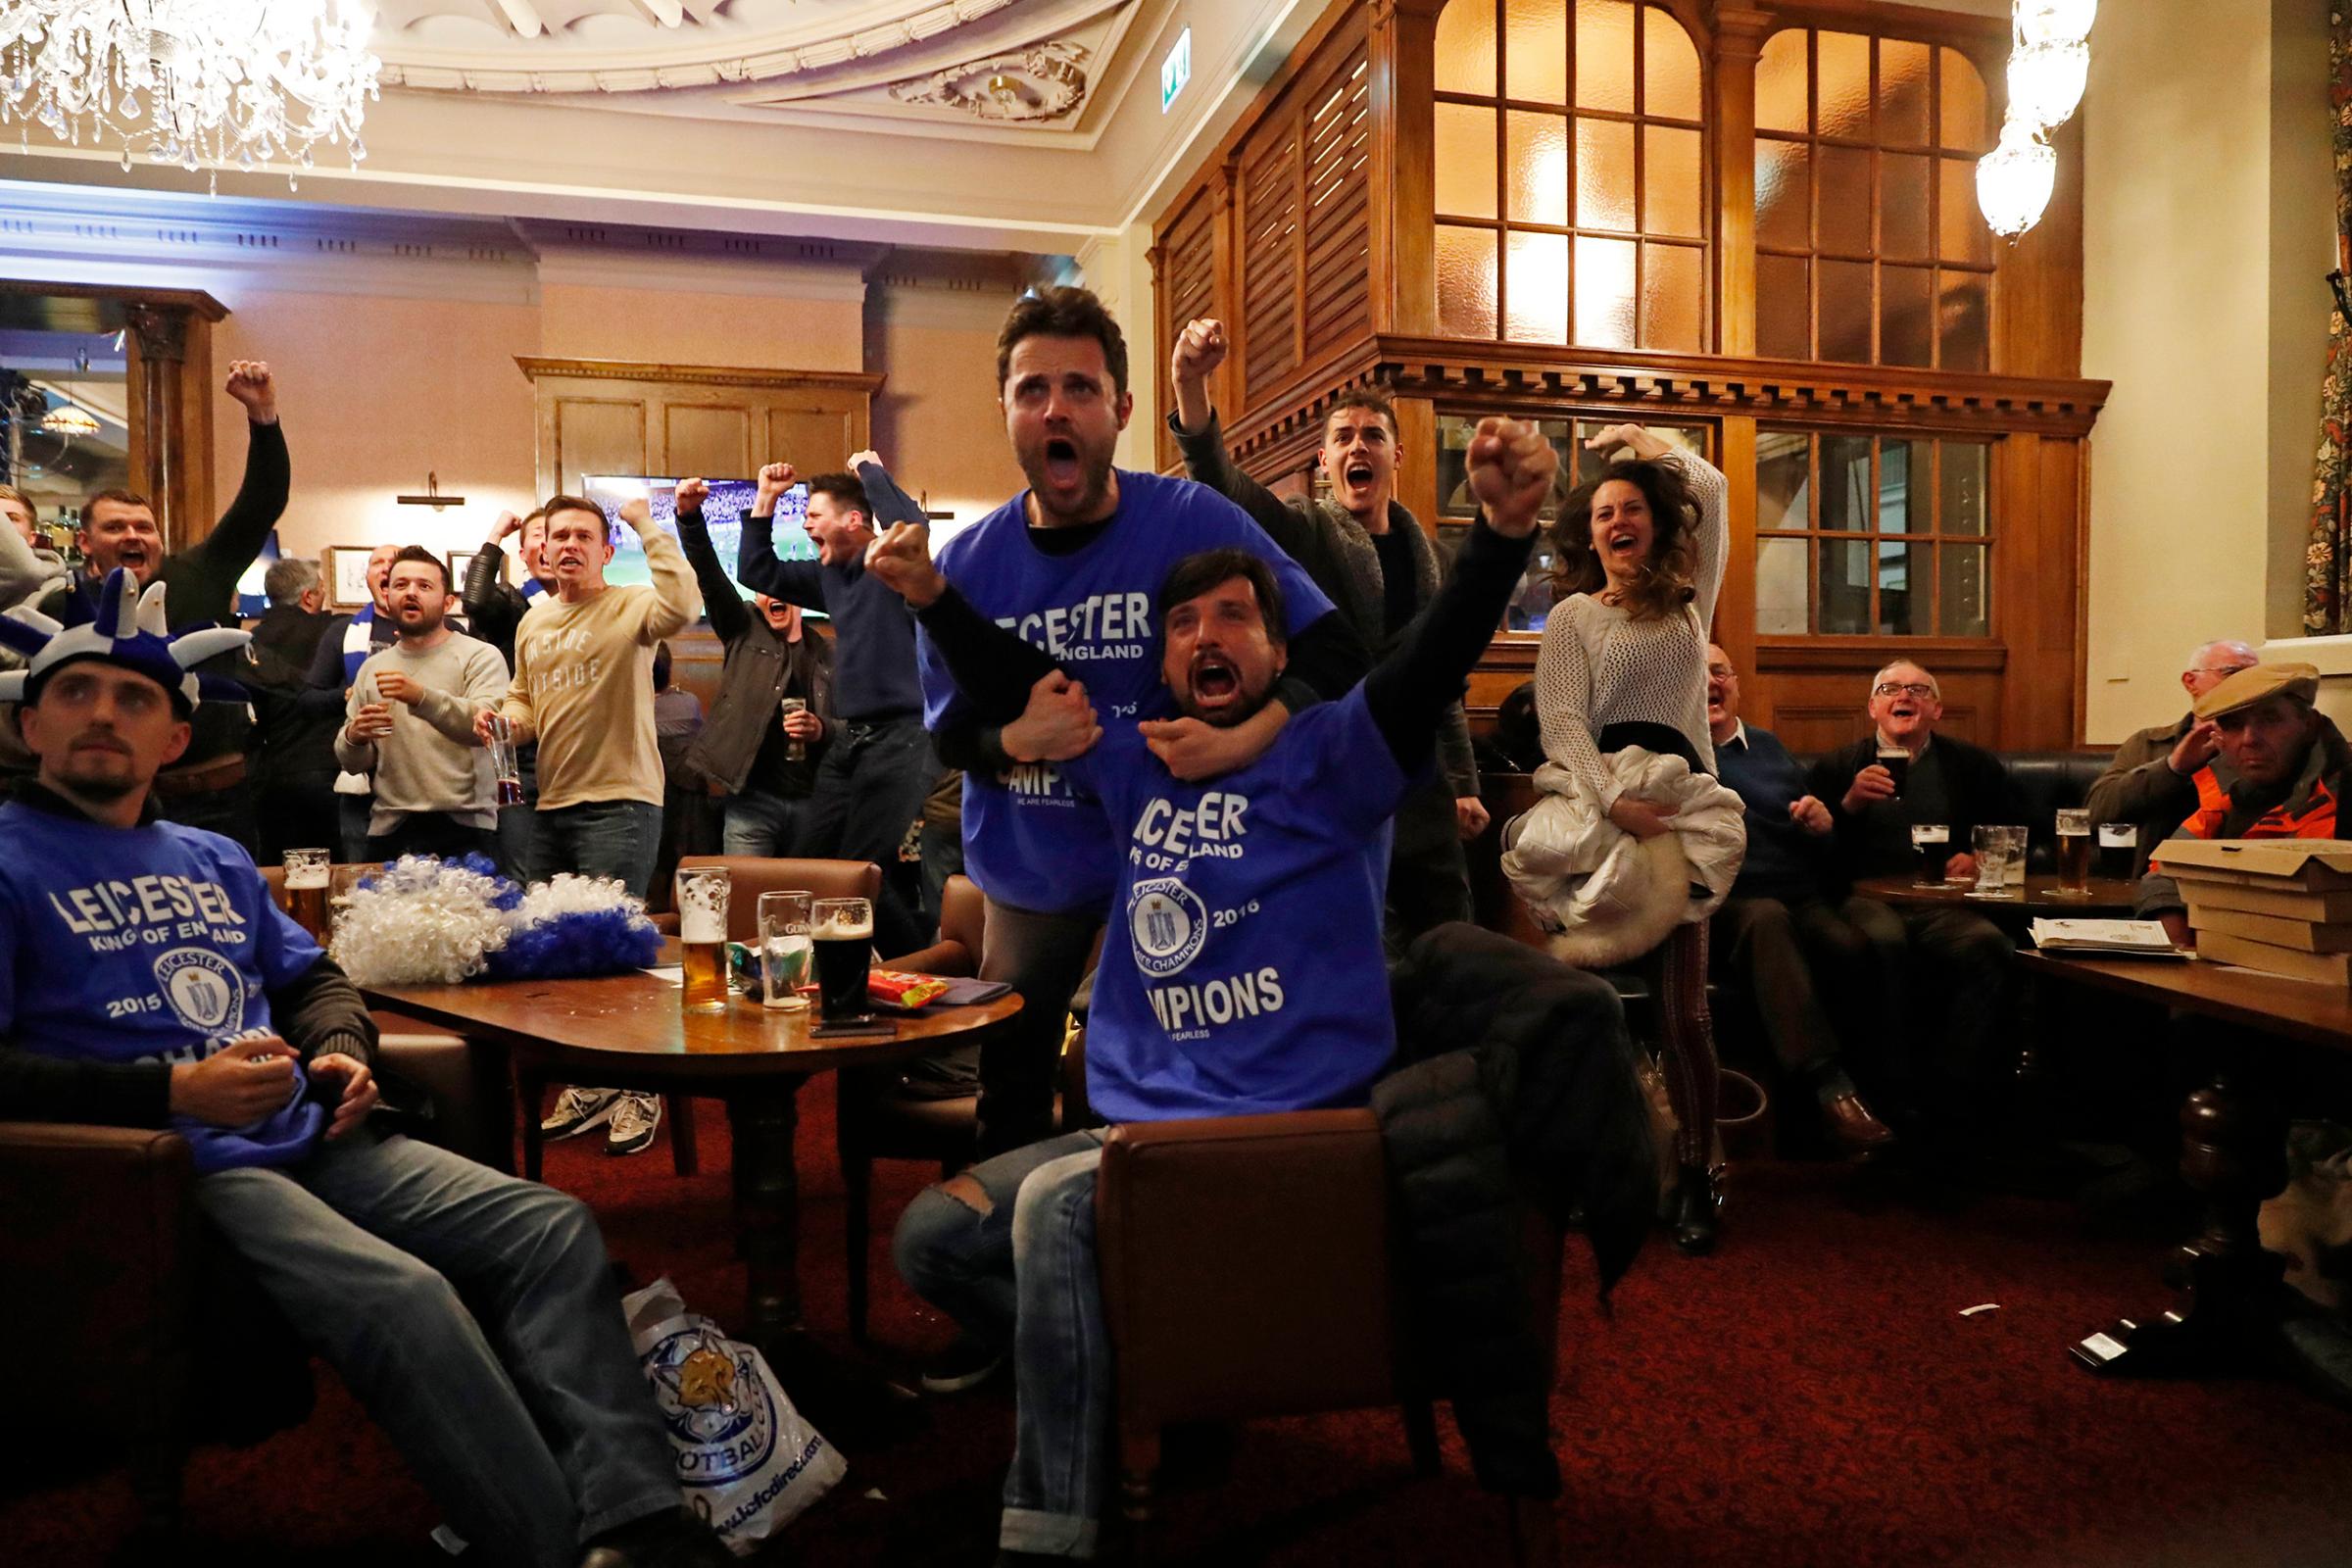 Leicester City fans celebrate after Chelsea's first goal against Tottenham Hotspur at a pub in Leicester, eastern England, May 2, 2016.